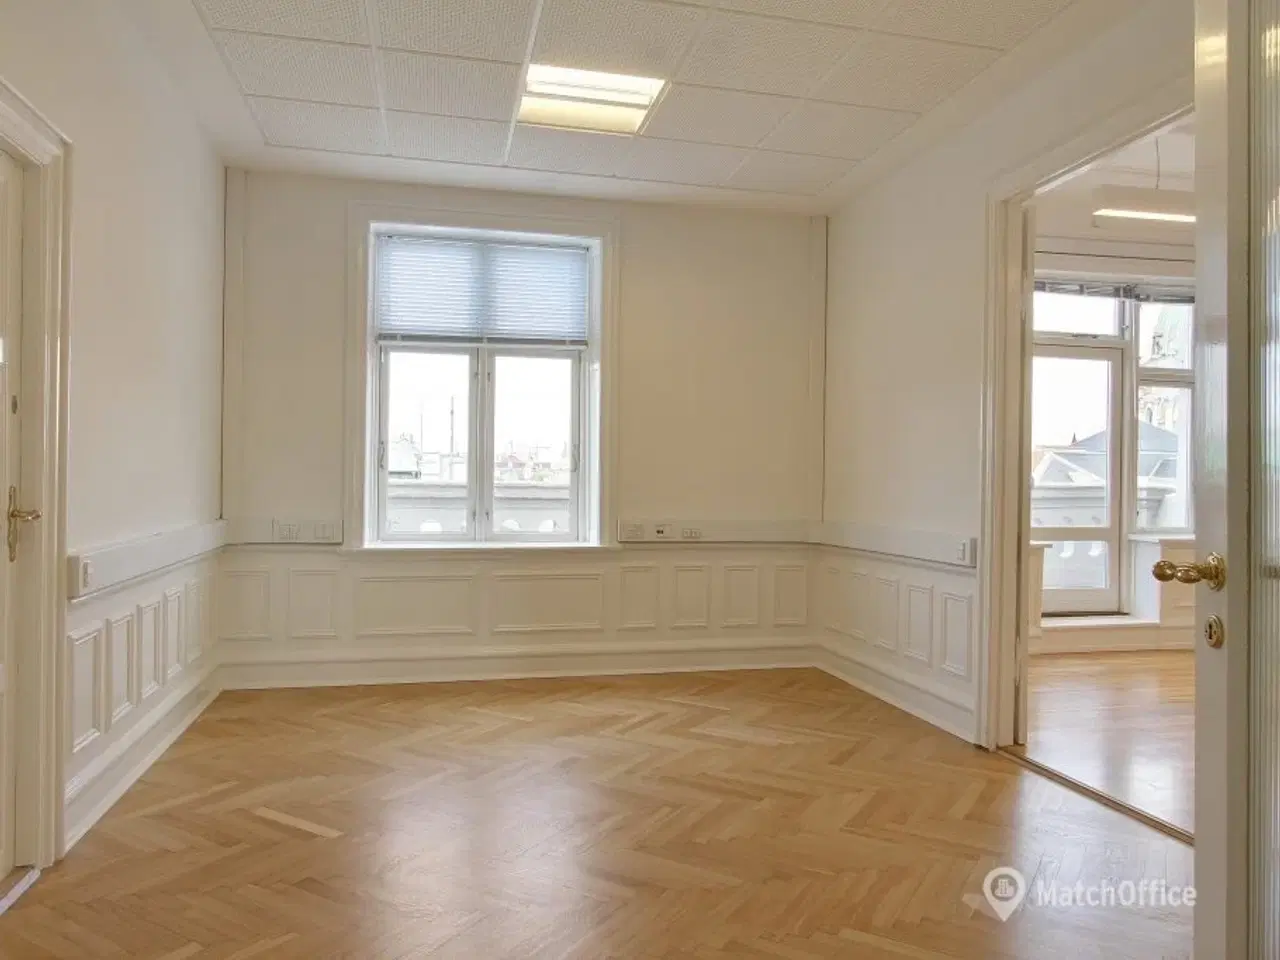 Billede 10 - Offices to rent in a perfectly located shared office space